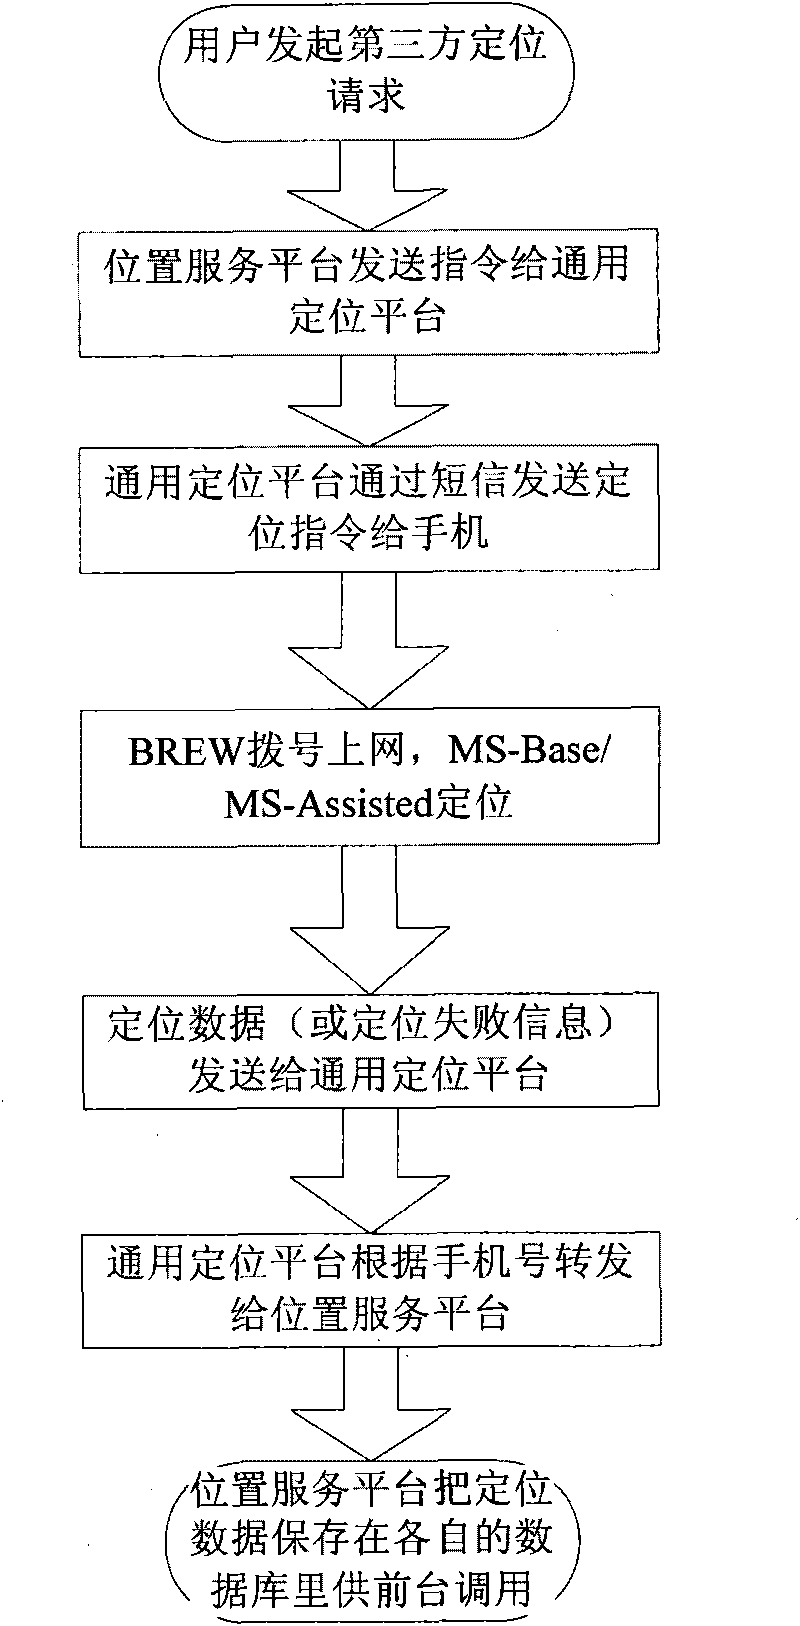 Implementation method of mobile phone third party positioning based on BREW platform